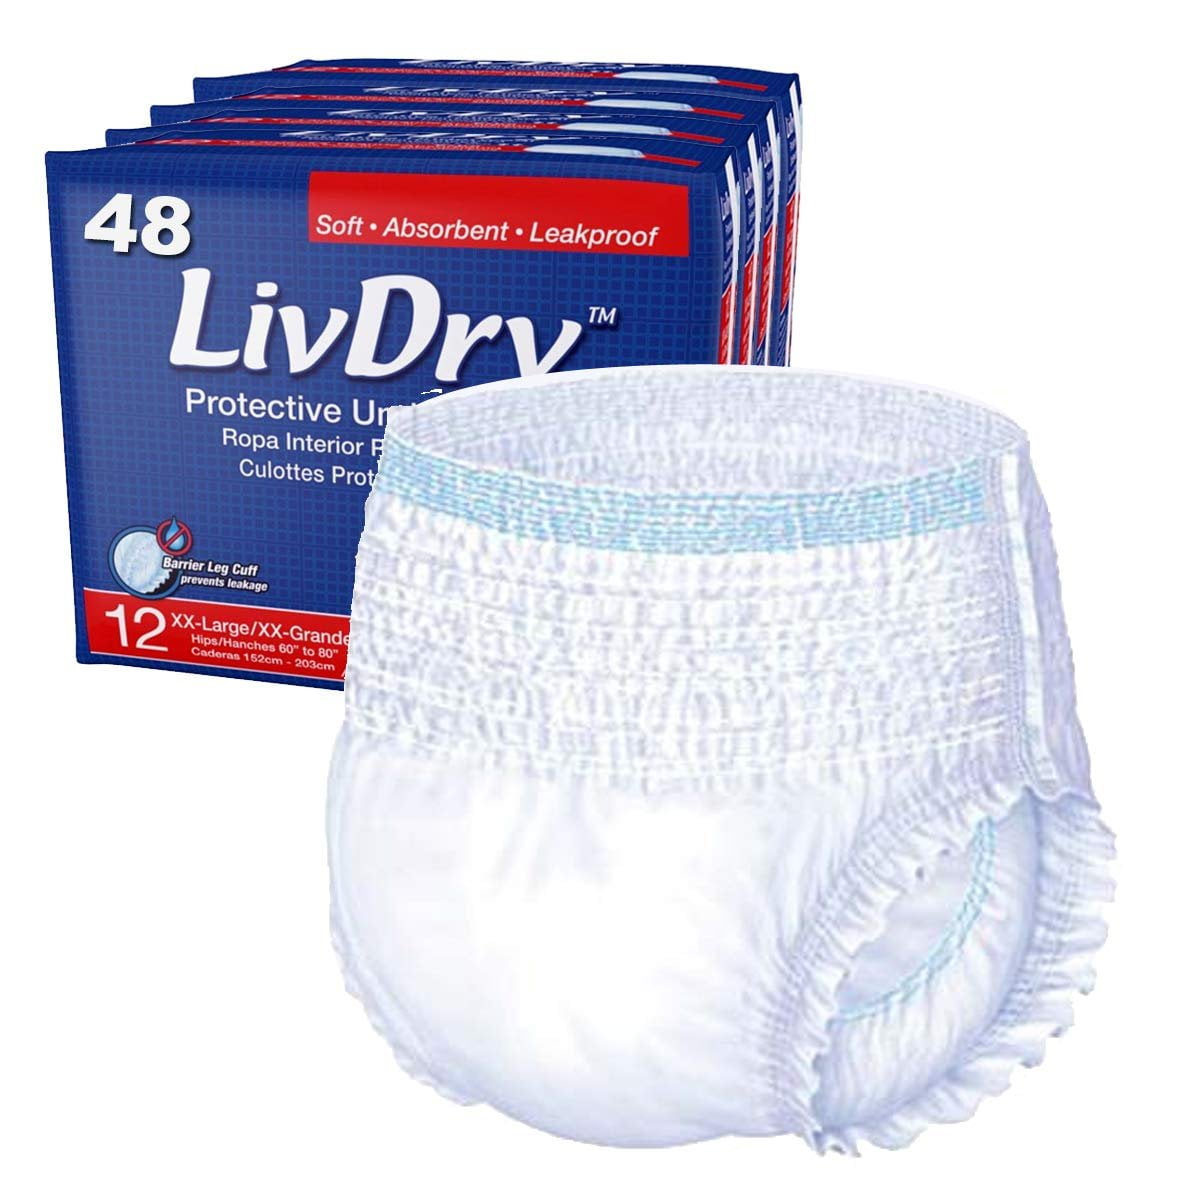 Adult Incontinence Underwear Diapers for Men and Women Size Large 40/pk 